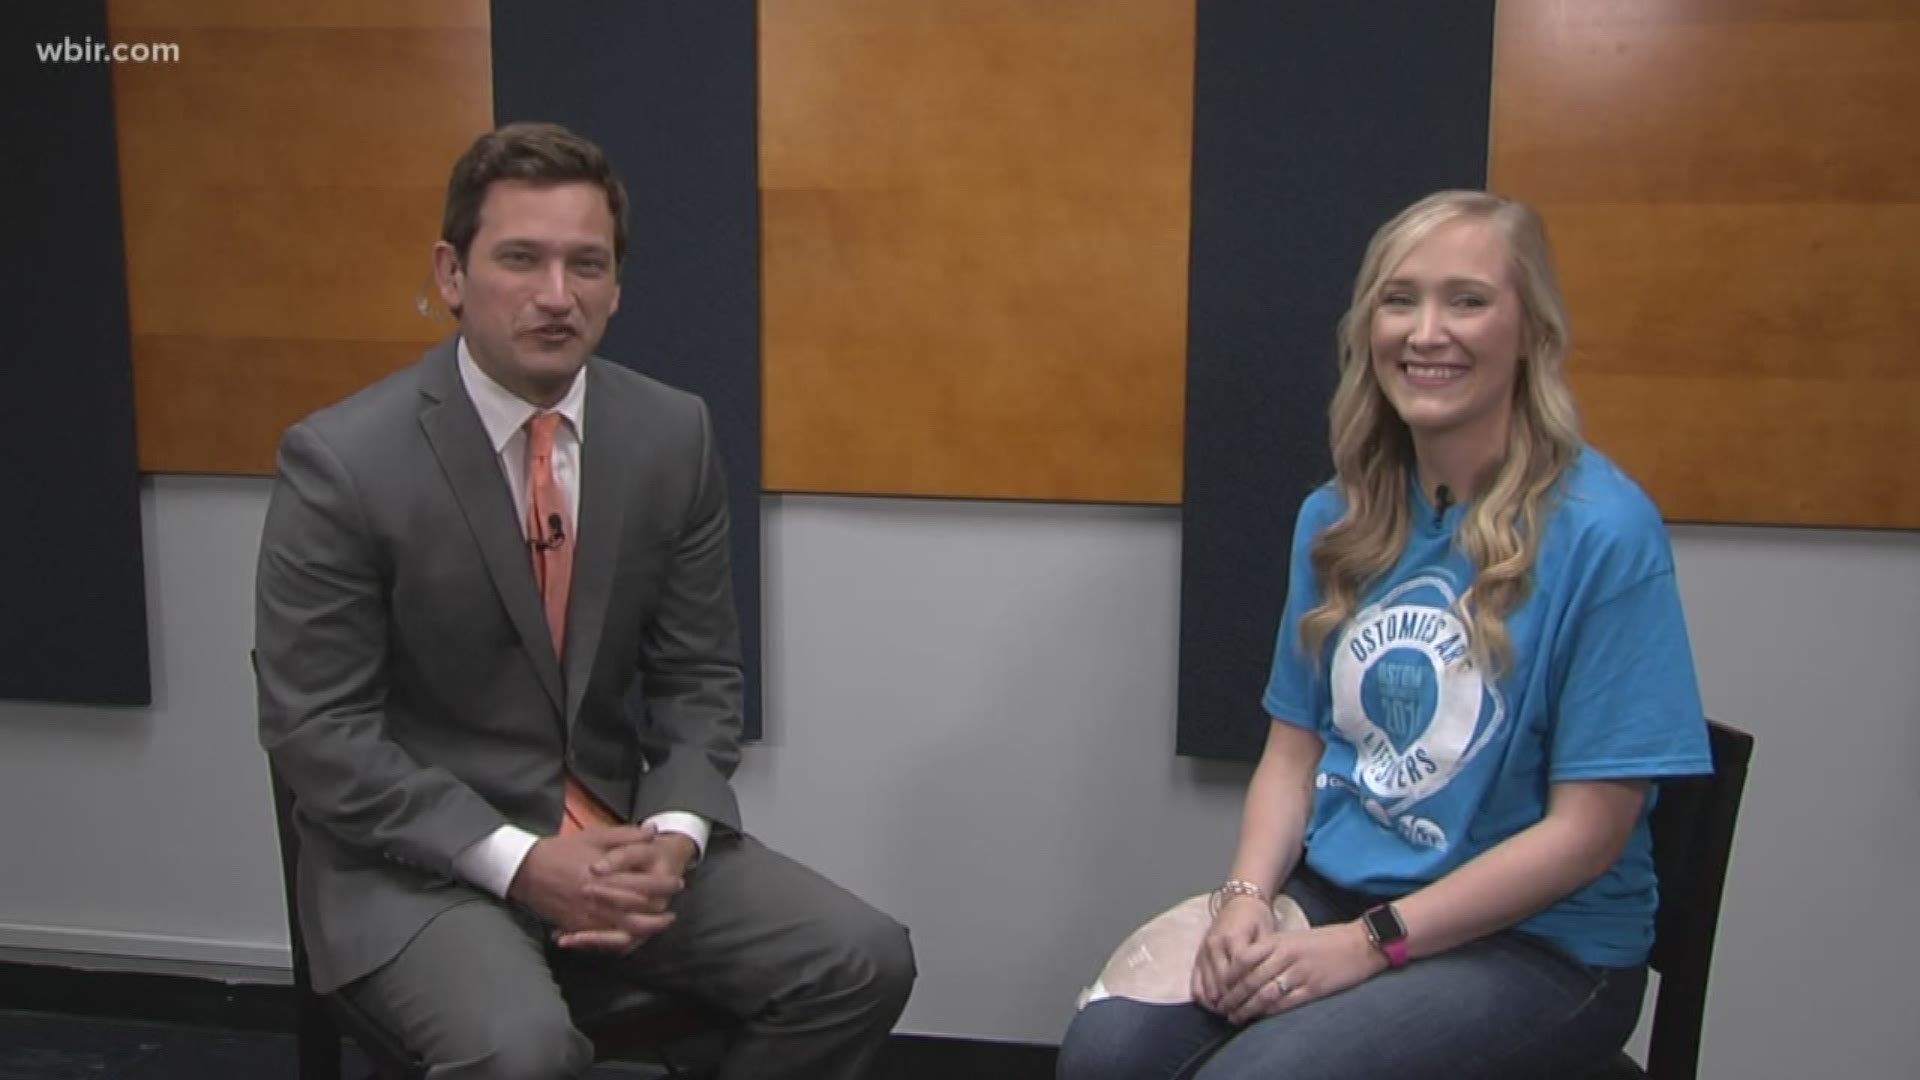 Amber Ogle joins us to help raise awareness about Ostomy surgery. She is also the creator of "The Ostomy Diarires."